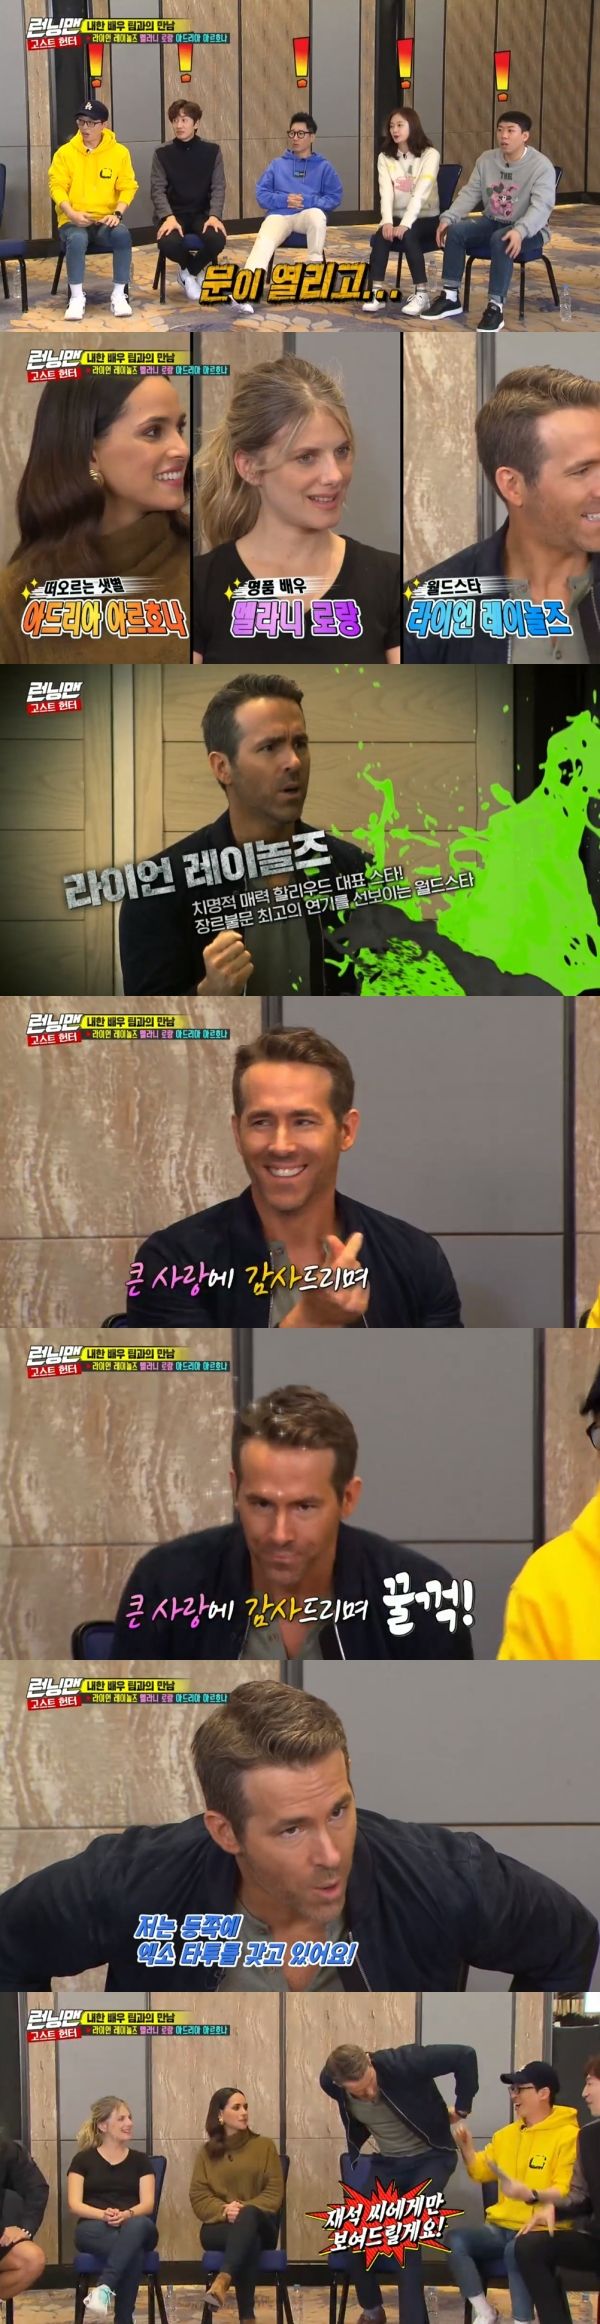 <p> Ryan Reynolds EXO tattoo was proud(?)</p><p>22 broadcast of SBS Running Manin Ryan Reynolds and Melanie Laurent, Adriatic d Or is a member of and has appeared.</p><p>This day in the broadcast, Ryan Reynolds, appeared at the same time members embraced. Lee Kwang-Soo in giraffe.and half that beauty exposed.</p><p>Stone with Ryan Reynolds in my power to hug me with it,and smiled.</p><p>Ryan Reynolds starred in the Im so glad. Here, the first victims being expected,he said. Adriatic d Or so can you come please and a-thank you,he said, and Melanie Laurent also properly prepared me,he added.</p><p>This Ryan Reynolds movie, 6 Undergroundfor the blockbuster action movieand online streaming by the public to be a movie. 6 the agents of death masquerading villains defeated,he explained.</p><p>This Ryan Reynolds is witty finger to the members of the laughter, I found myself in. Or, dorsal EXO tattoo there. Re-analysis of the seeds show it only to you and said,Your from here. To this Yoo Jae-Suk is the World star the of Whisperer to me wasand burst out laughing.</p>